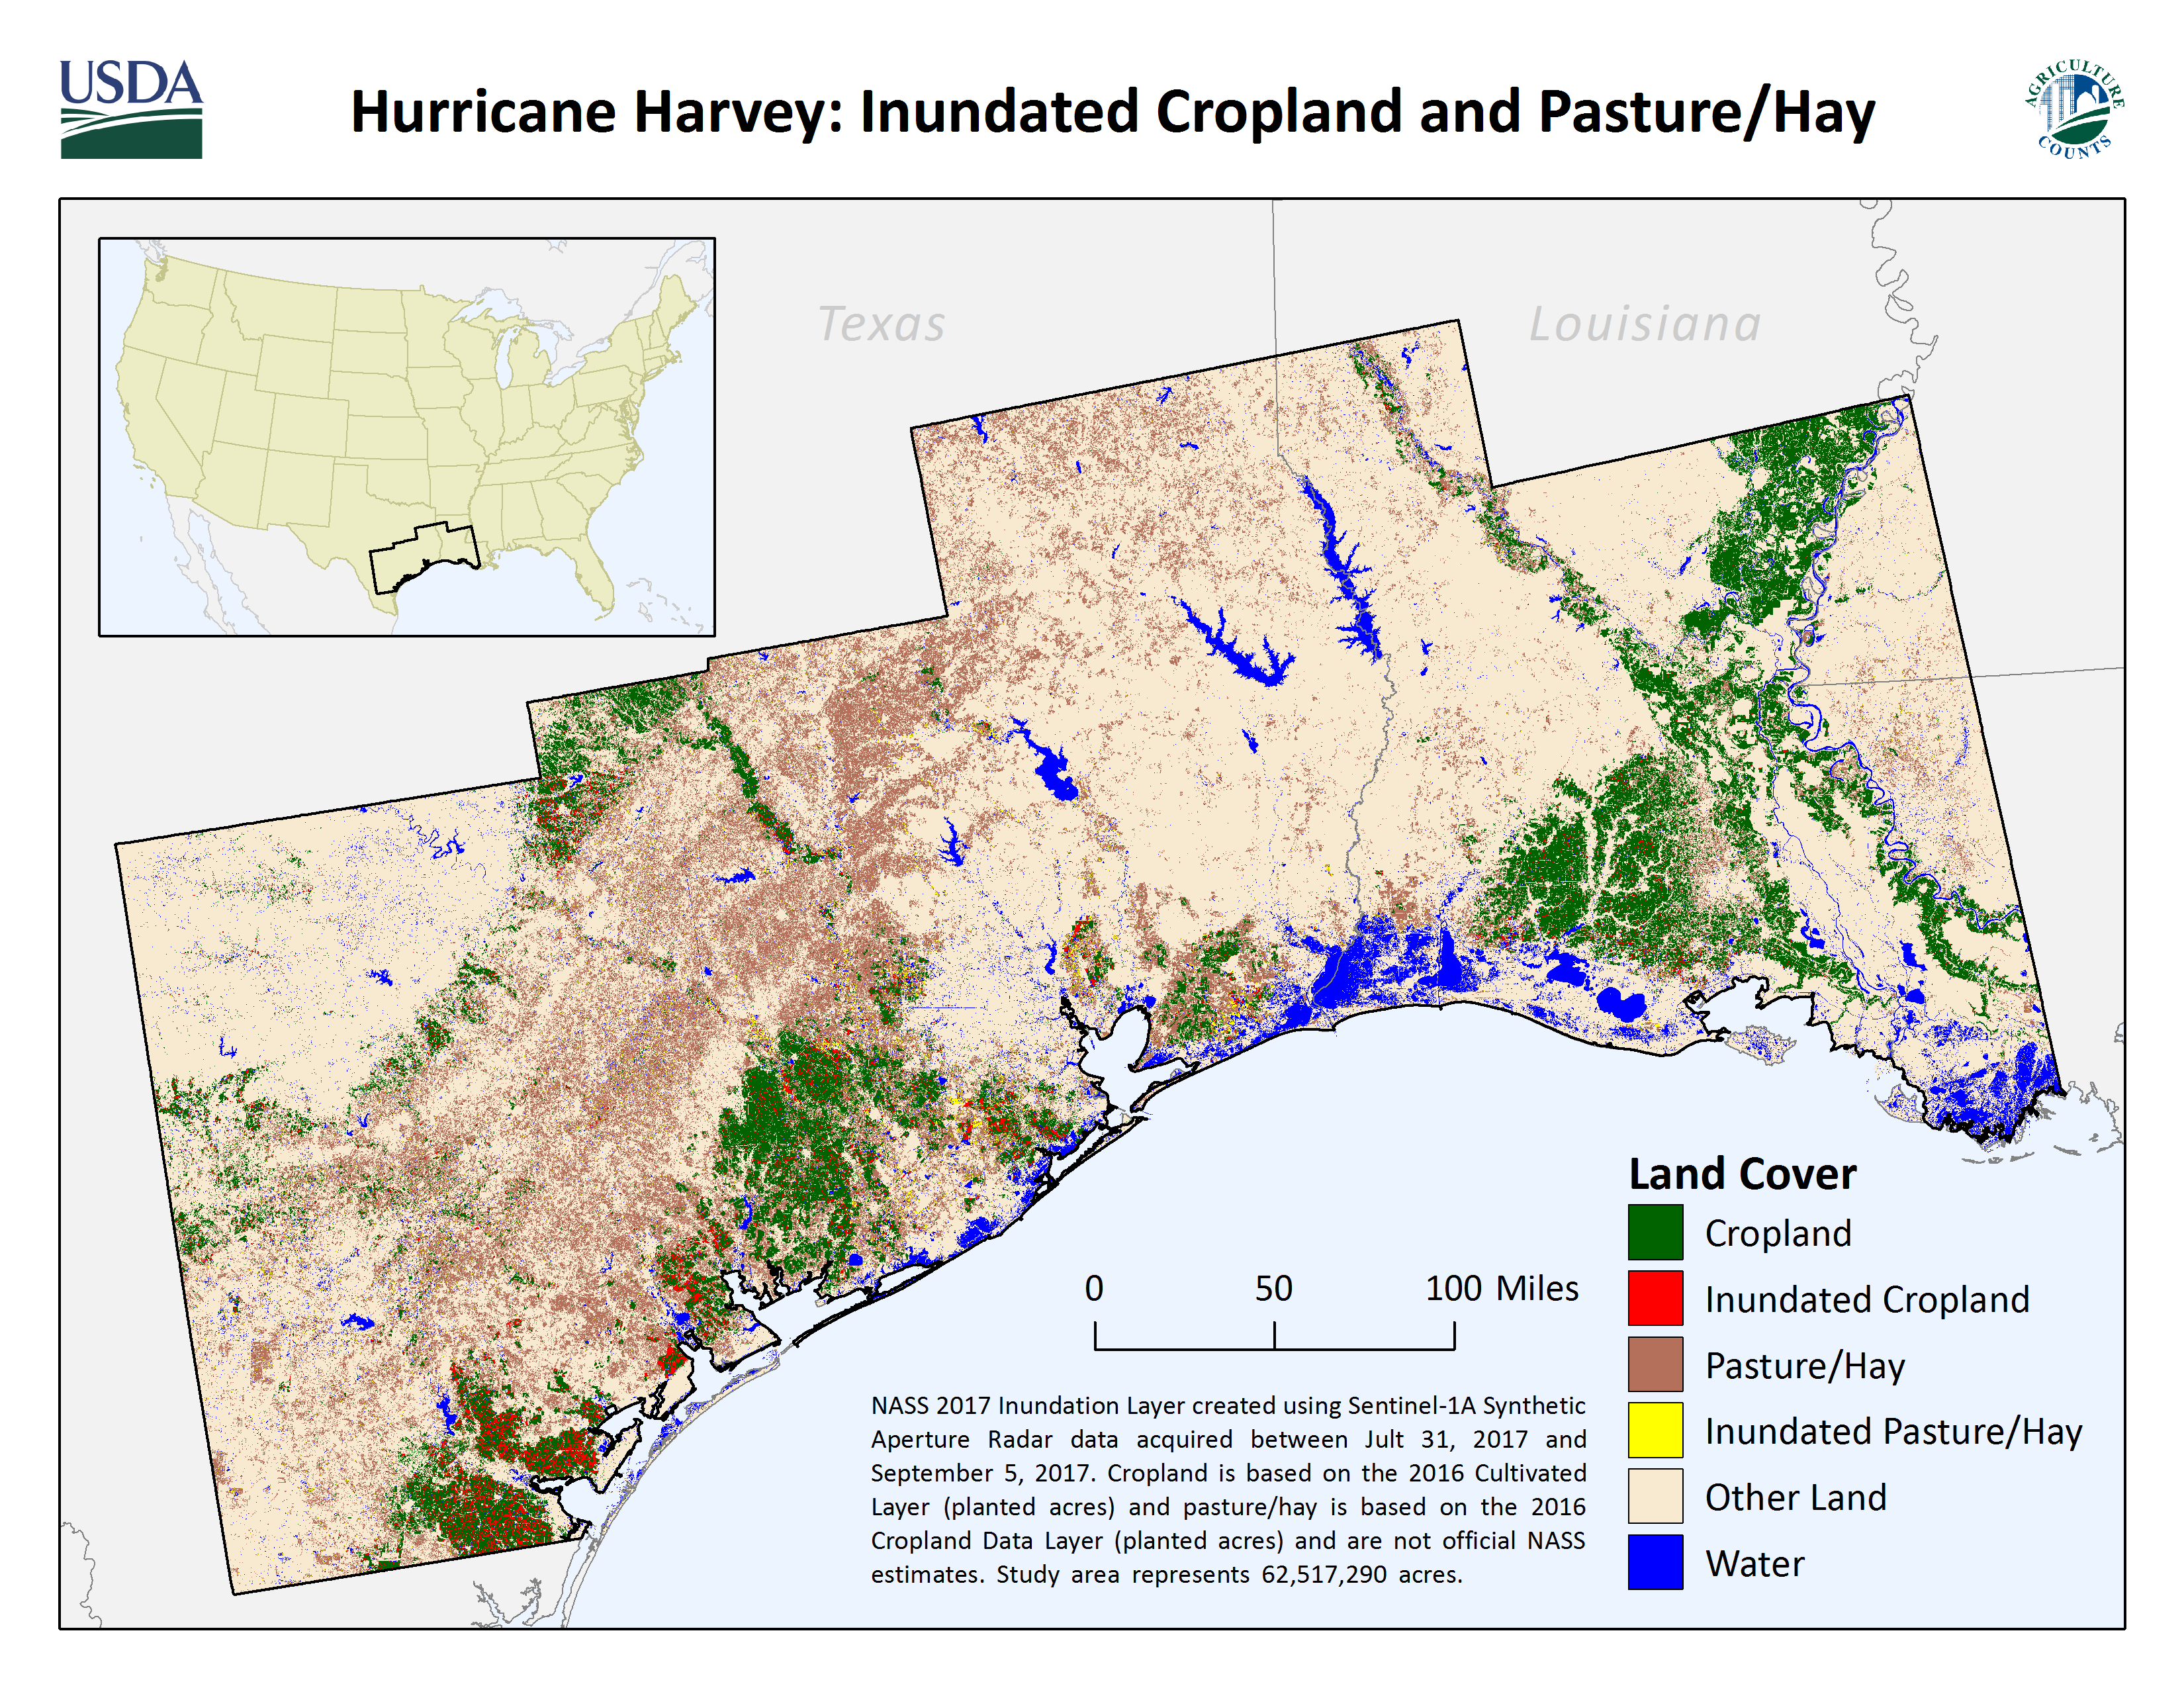 Map of Inundated Cropland and Pasture/Hay from Hurrican Harvey